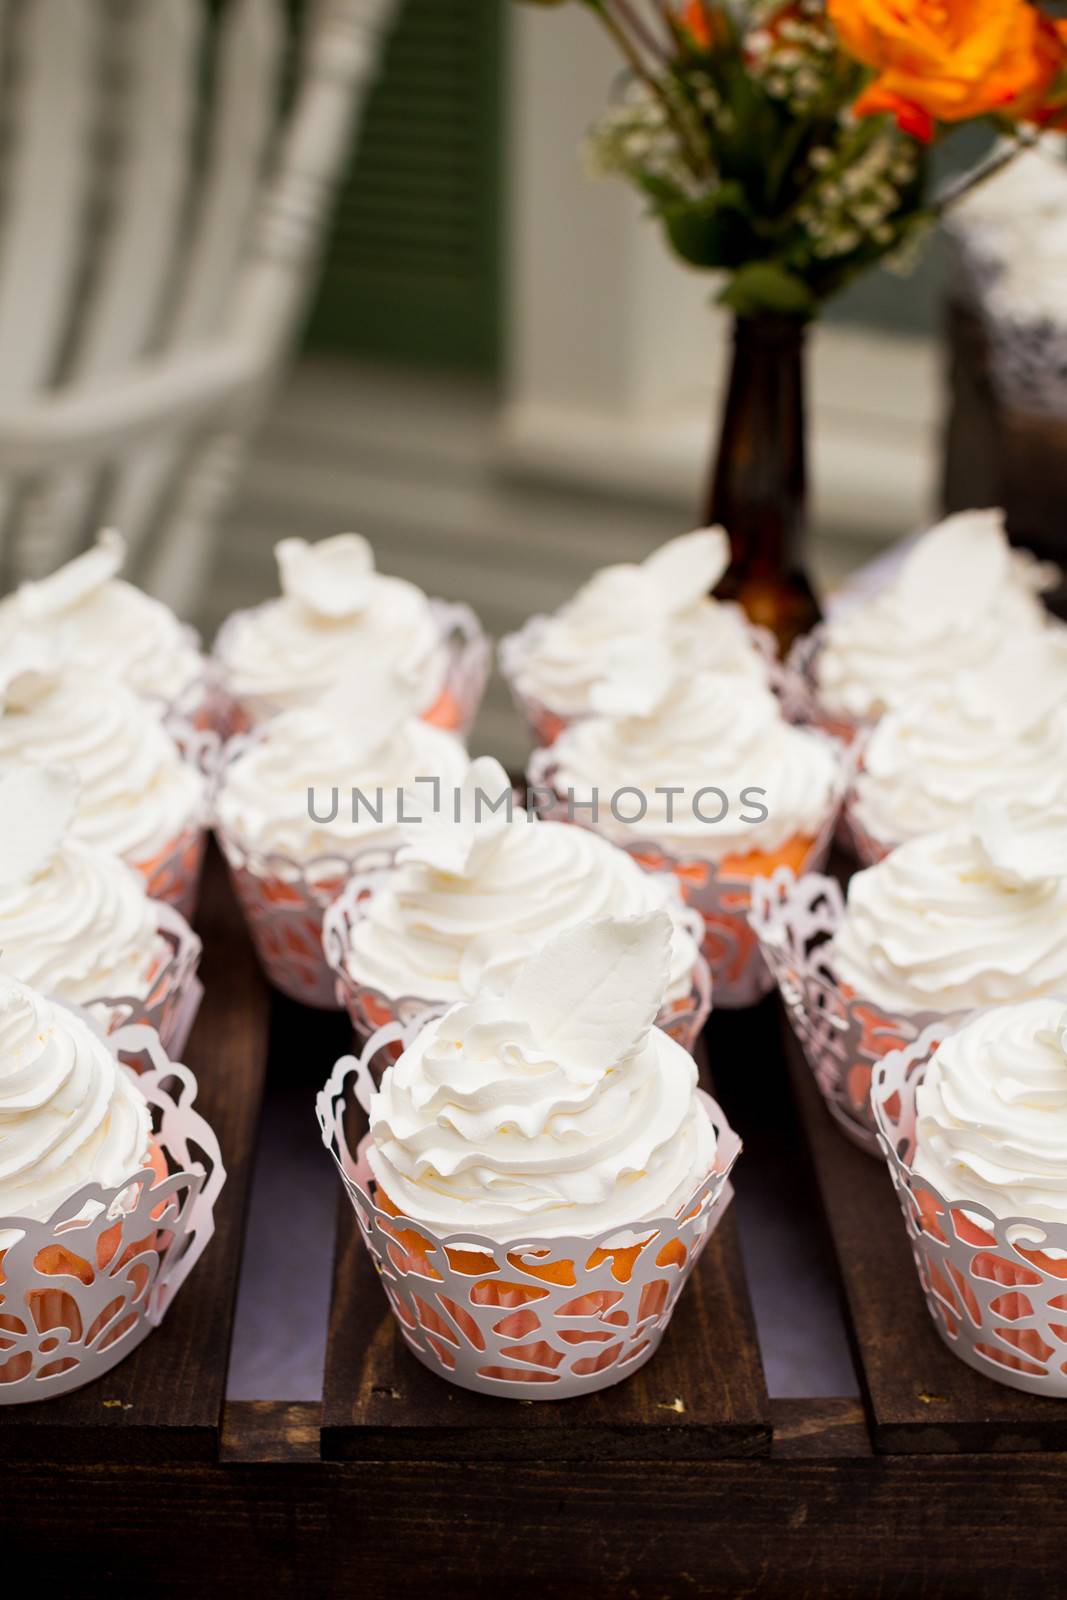 These cupcakes at a wedding reception are ready for the guests to enjoy after the cake cutting ceremony.